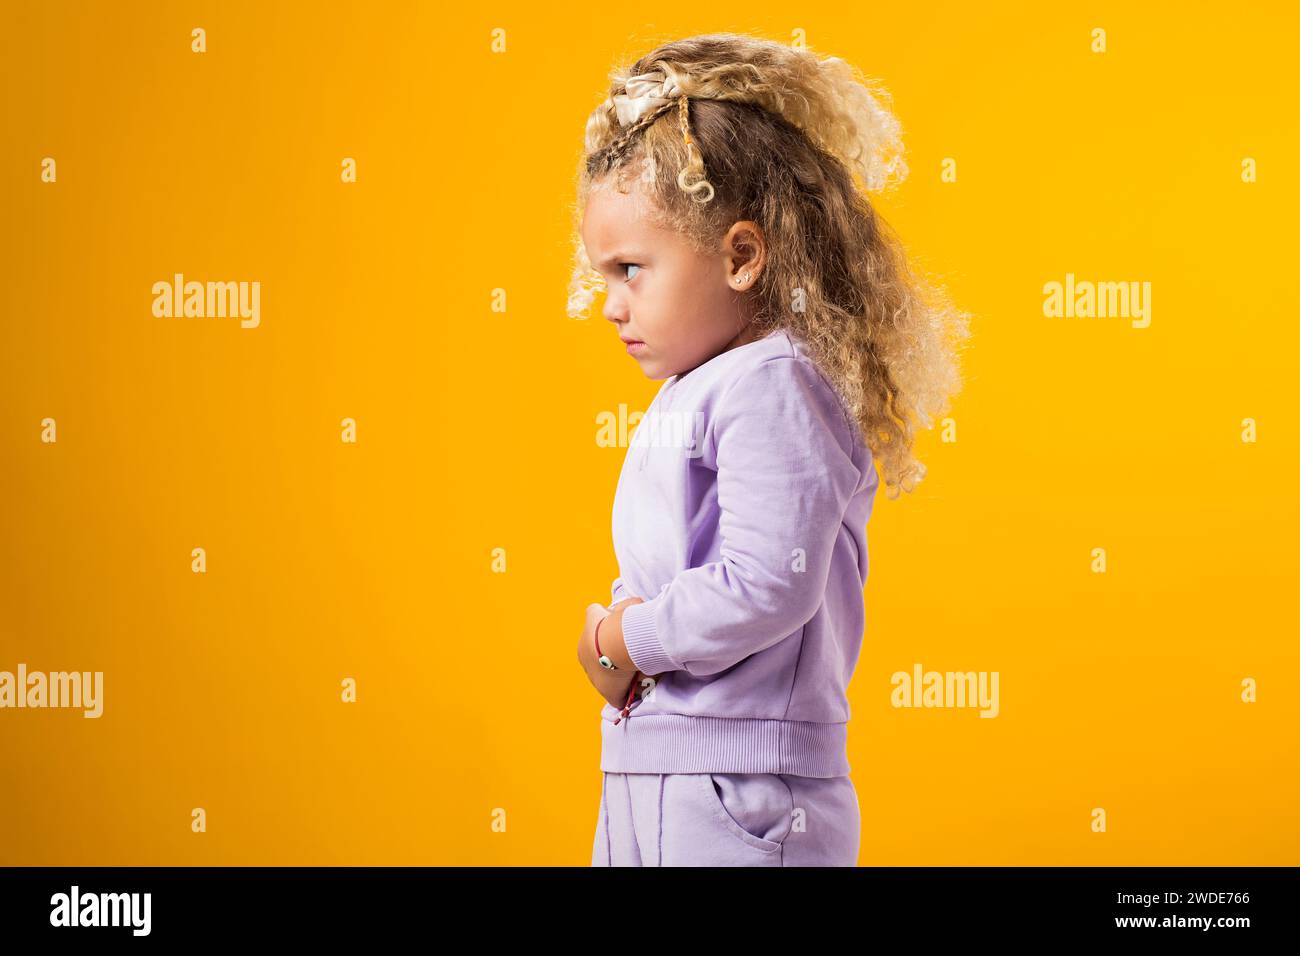 Portrait of child girl feeling abdominal pain, keeping hands on stomach because indigestion, painful illness feeling unwell. Ache concept. Stock Photo